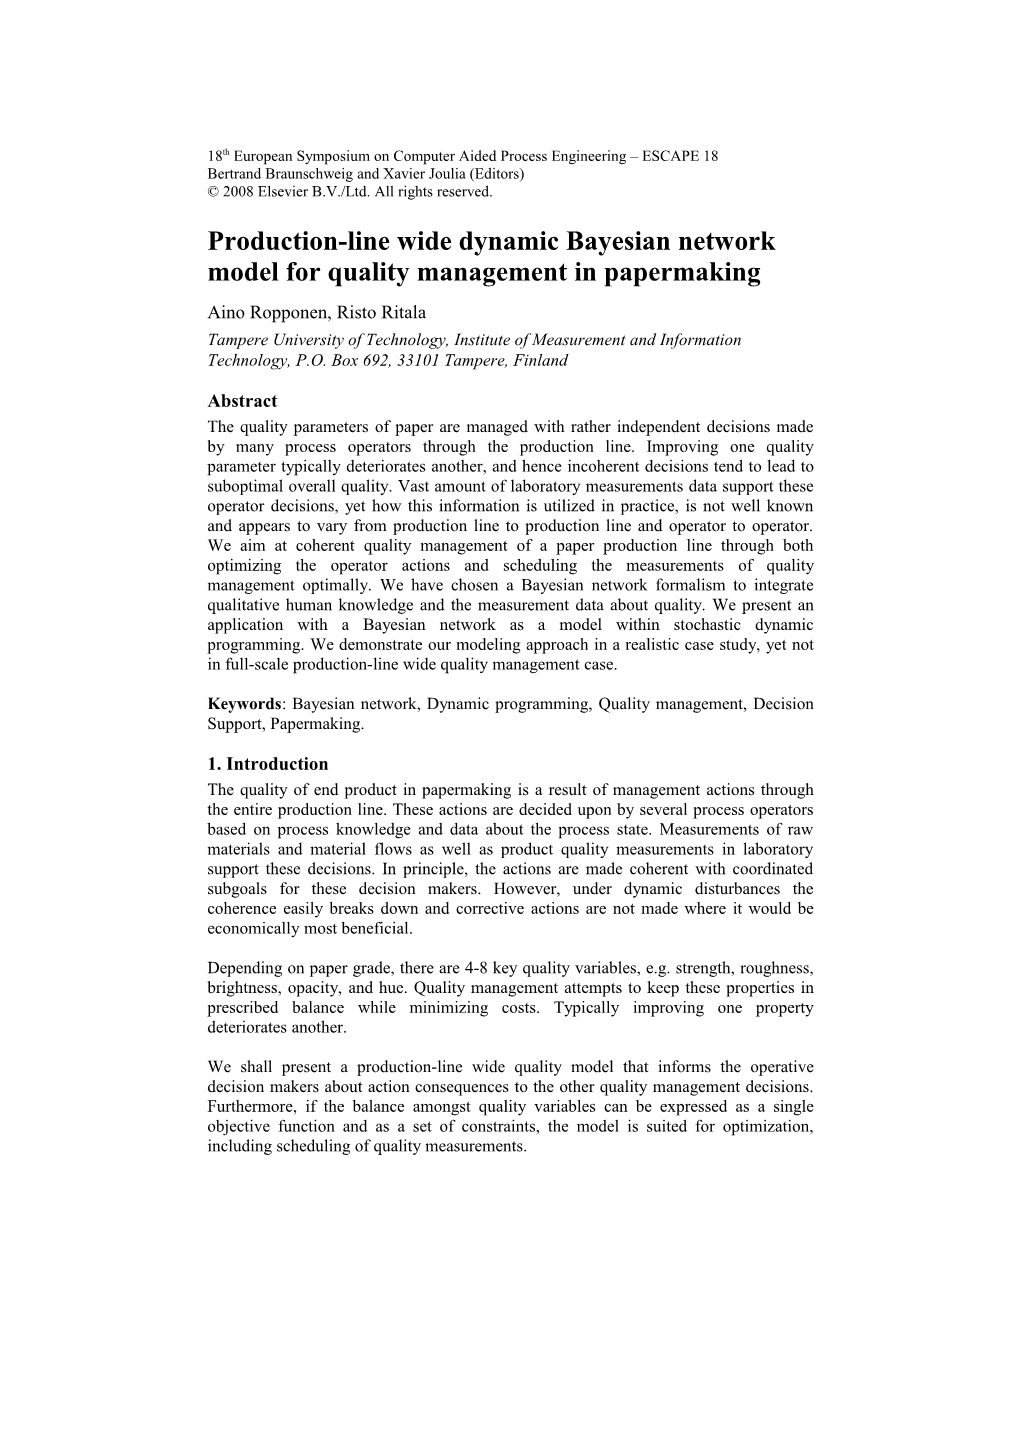 Production-Line Wide Dynamic Bayesian Network Model for Quality Management in Papermaking